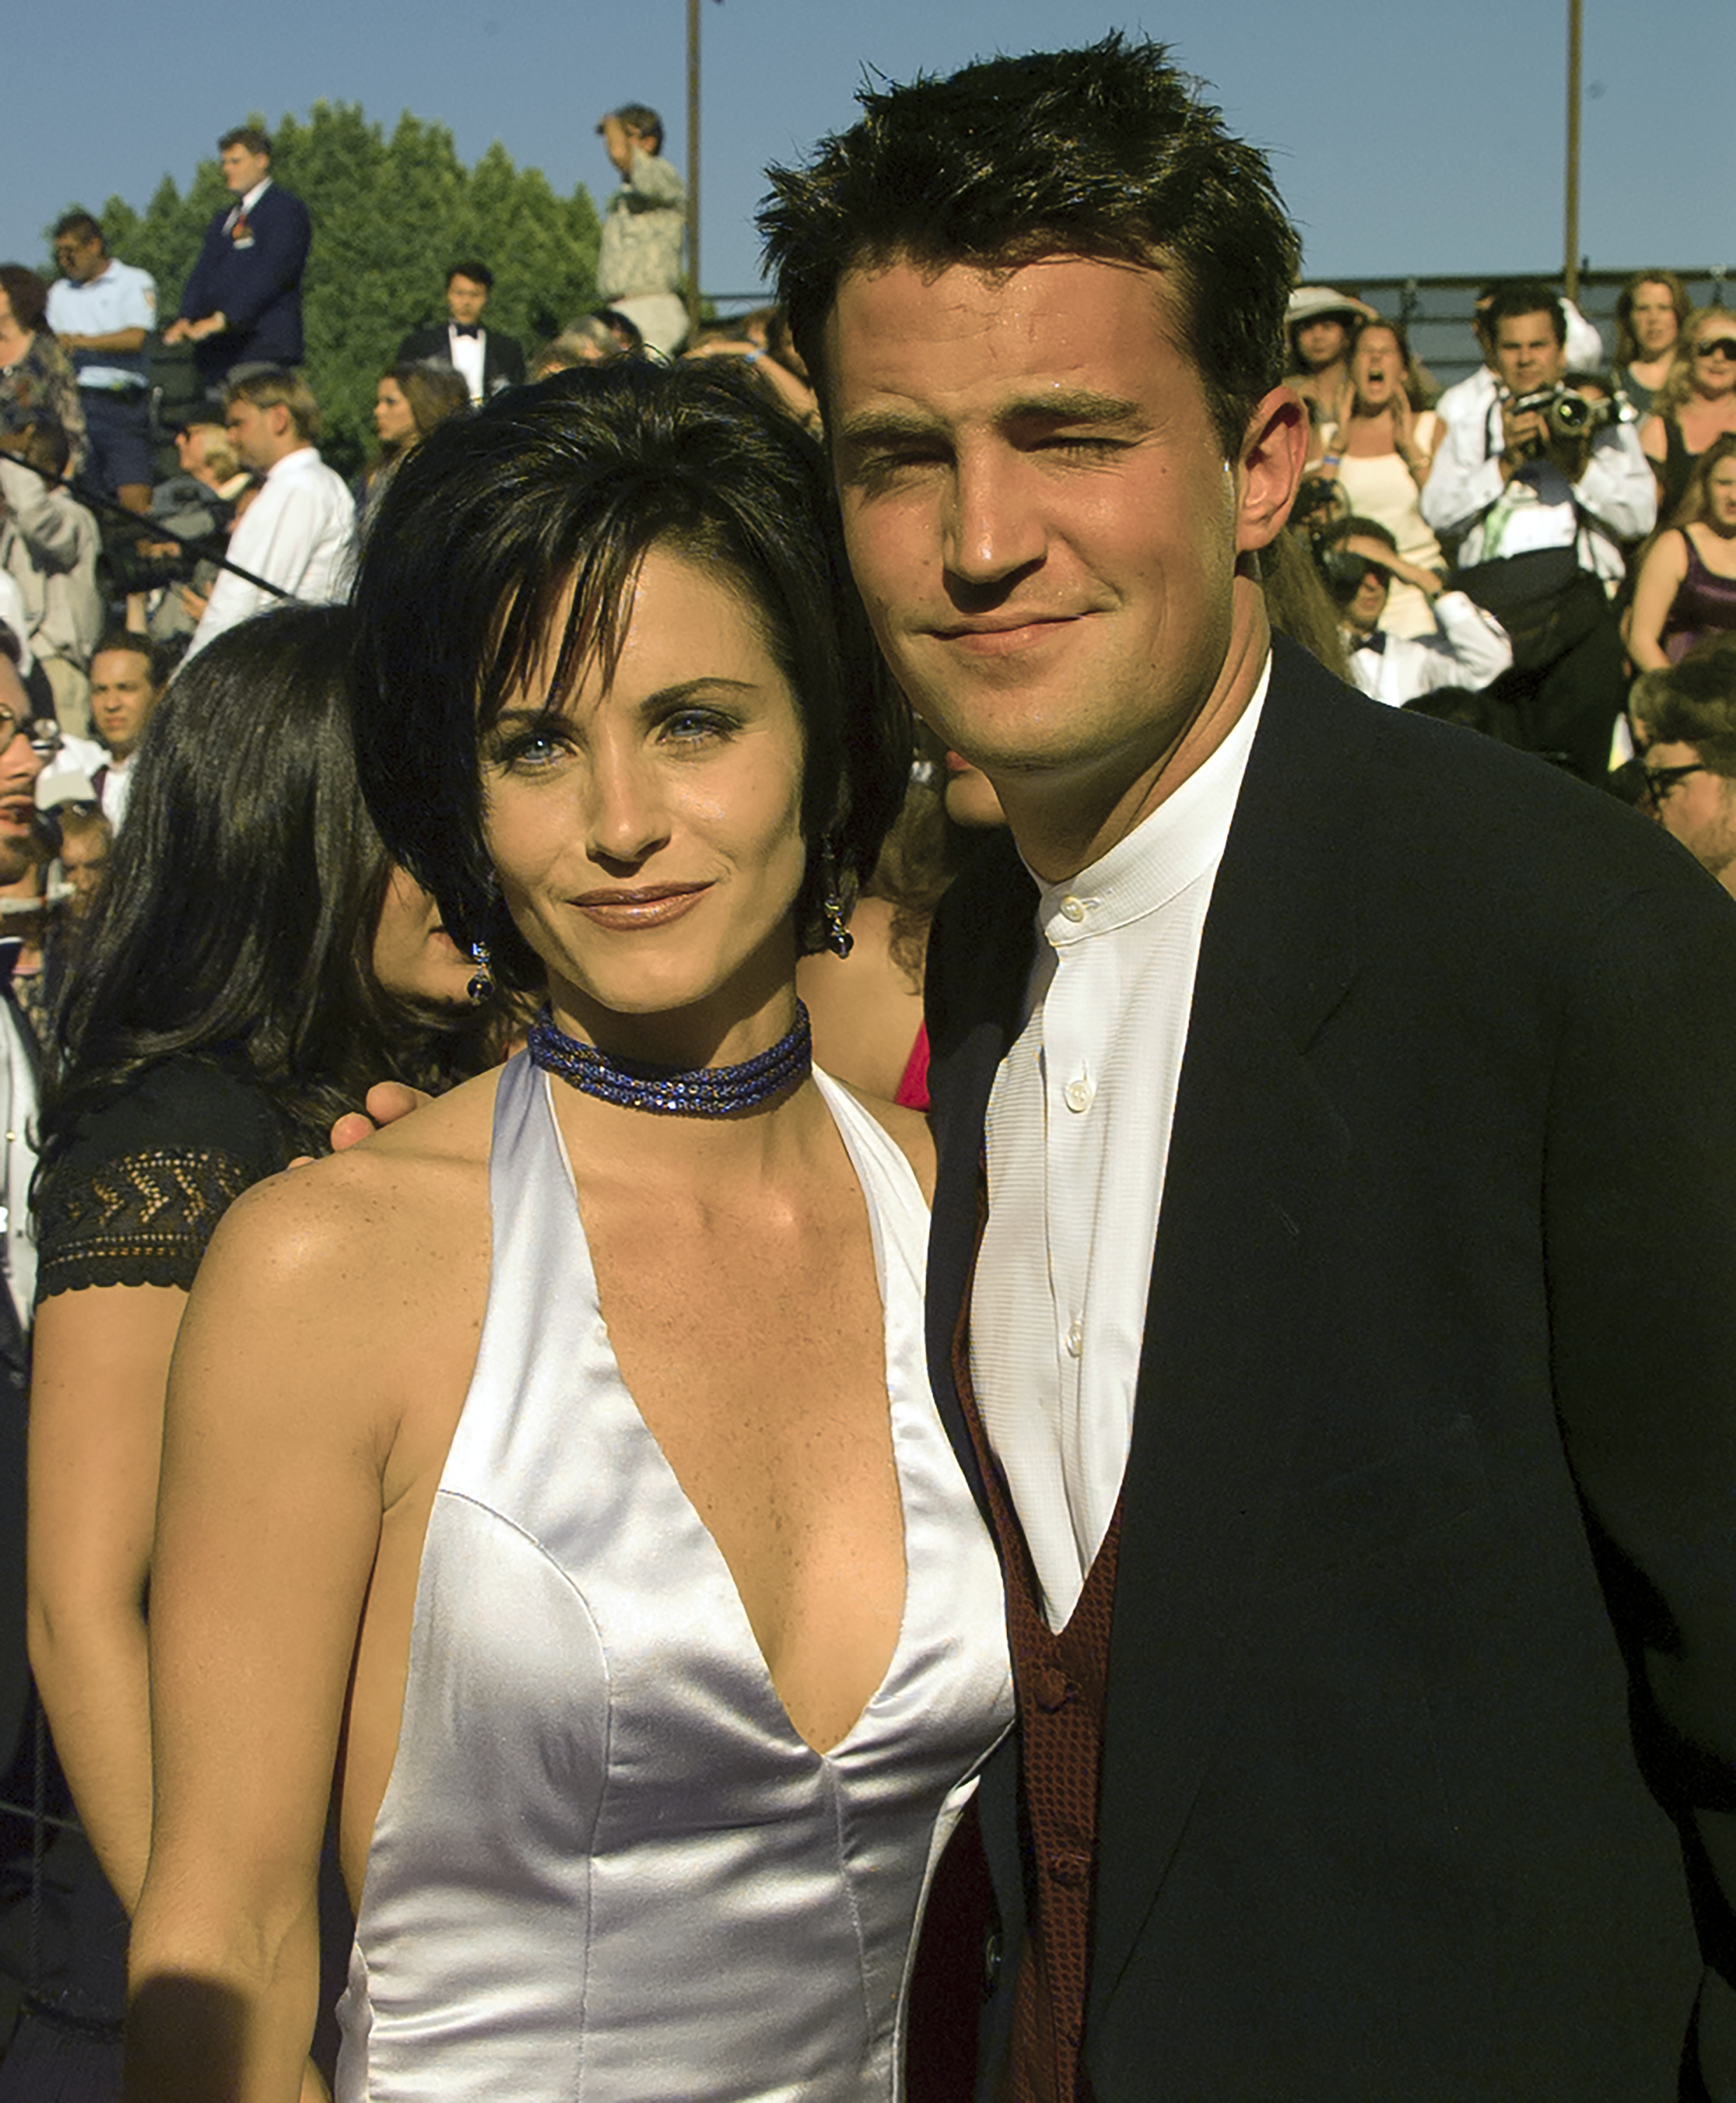 Closeup of Courteney Cox and Matthew Perry at a media event